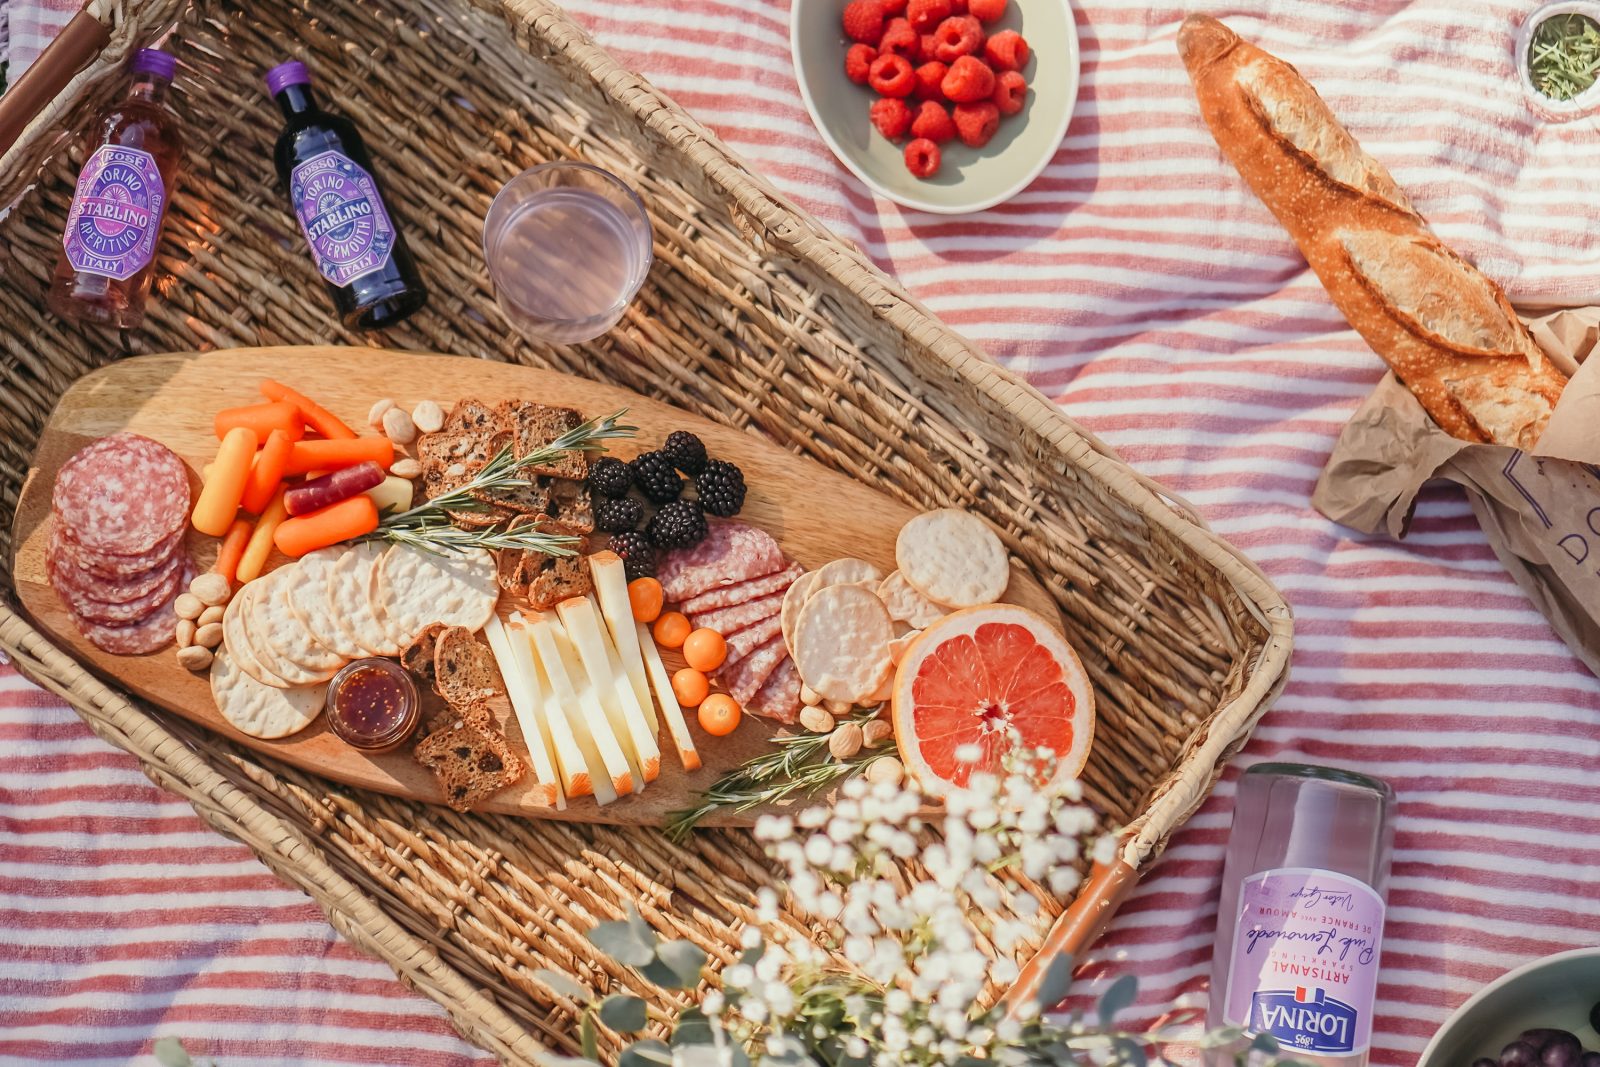 Charcuterie board for a nashville picnic. Served with a baguette and french Lorina.